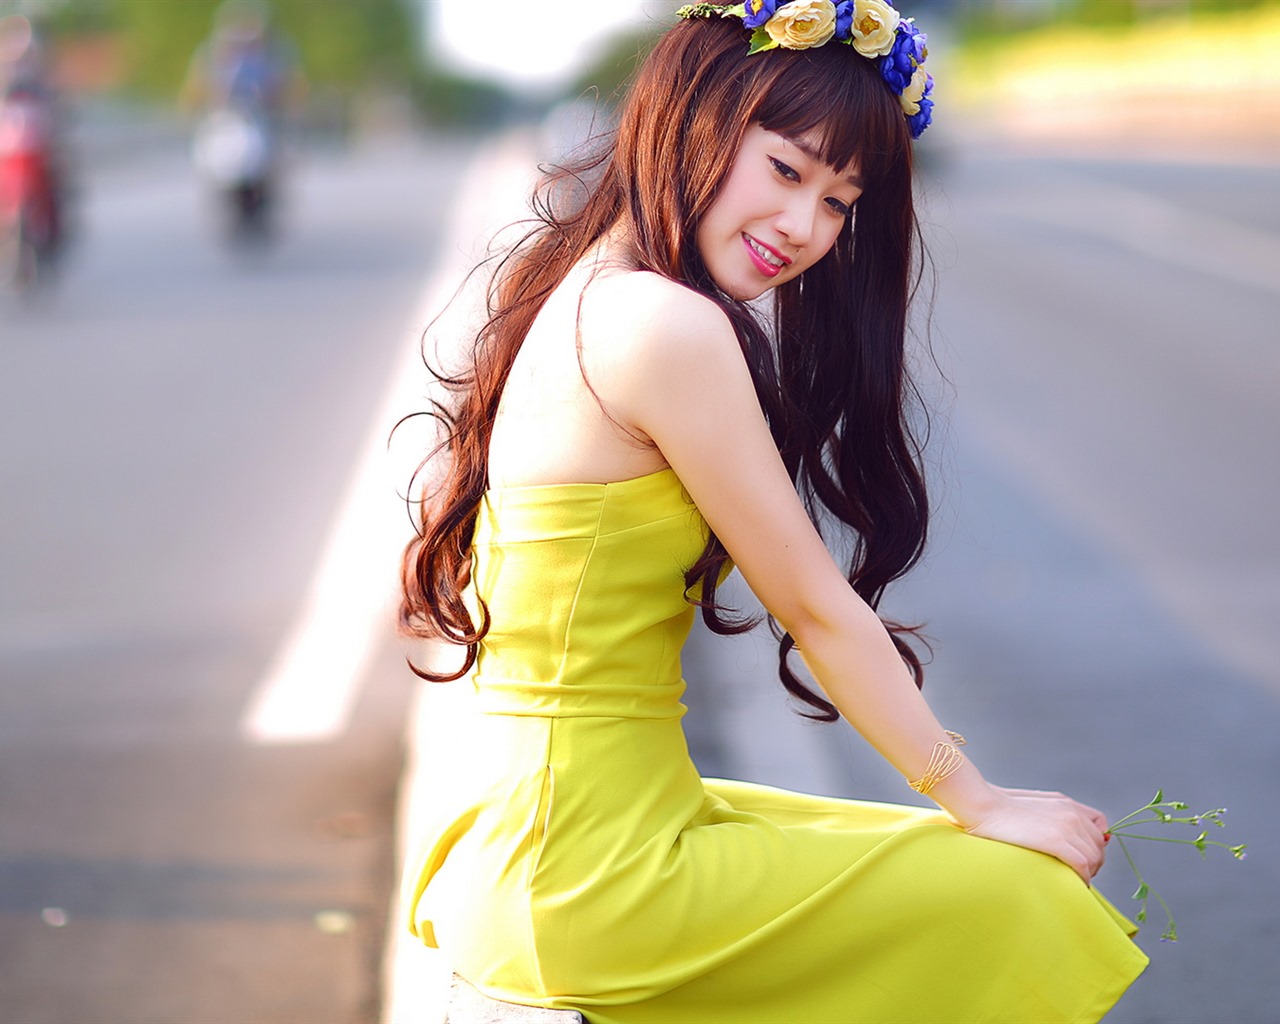 Pure and lovely young Asian girl HD wallpapers collection (2) #27 - 1280x1024